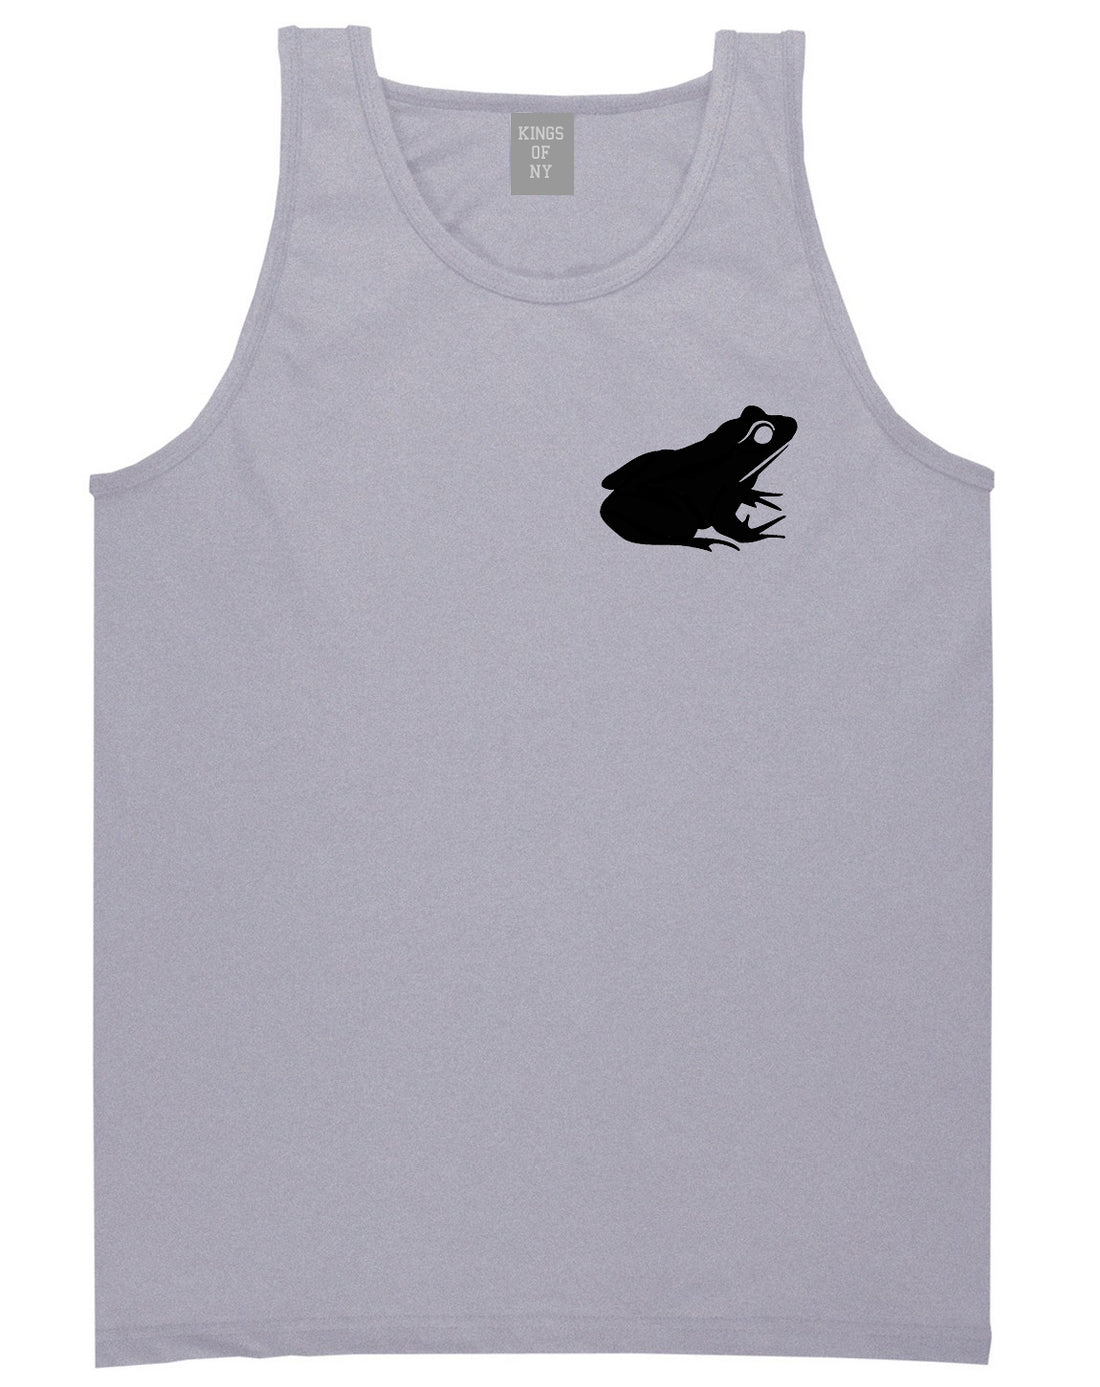 Frog Animal Chest Mens Grey Tank Top Shirt by KINGS OF NY